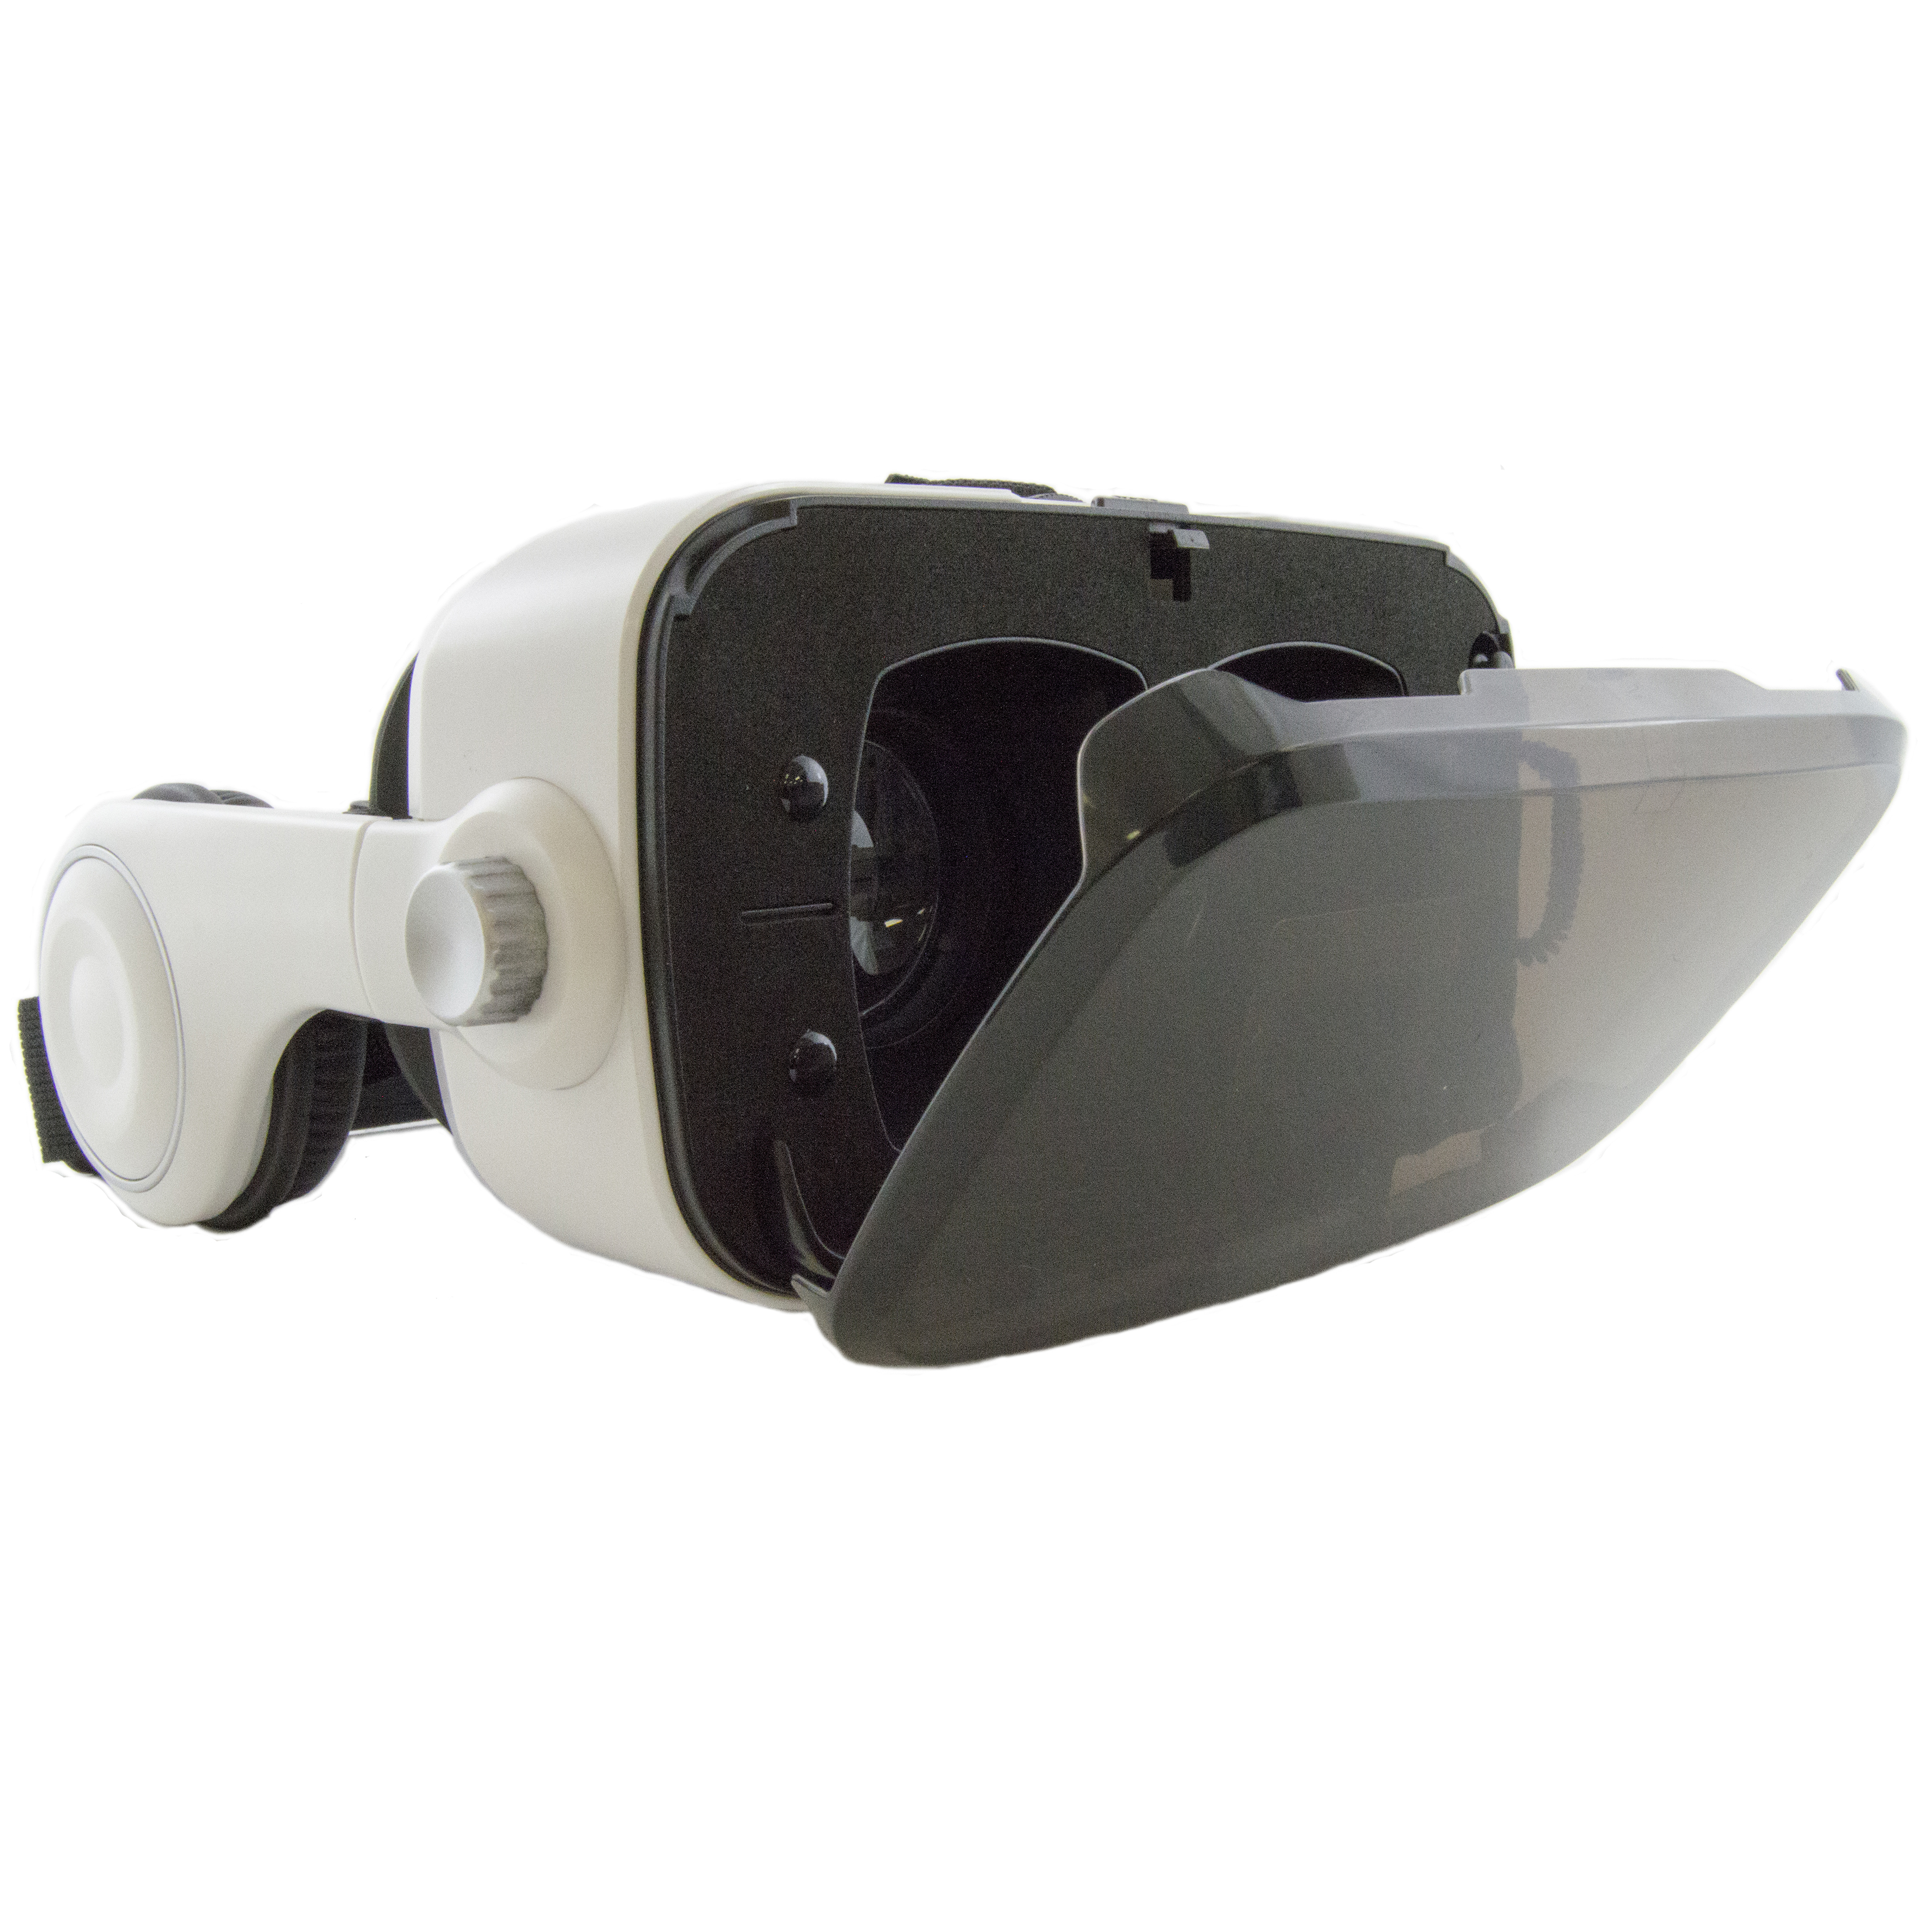 3D VR Headset with Stereo Headphones for all 4.7" to 6.2" Smartphones - image 3 of 7